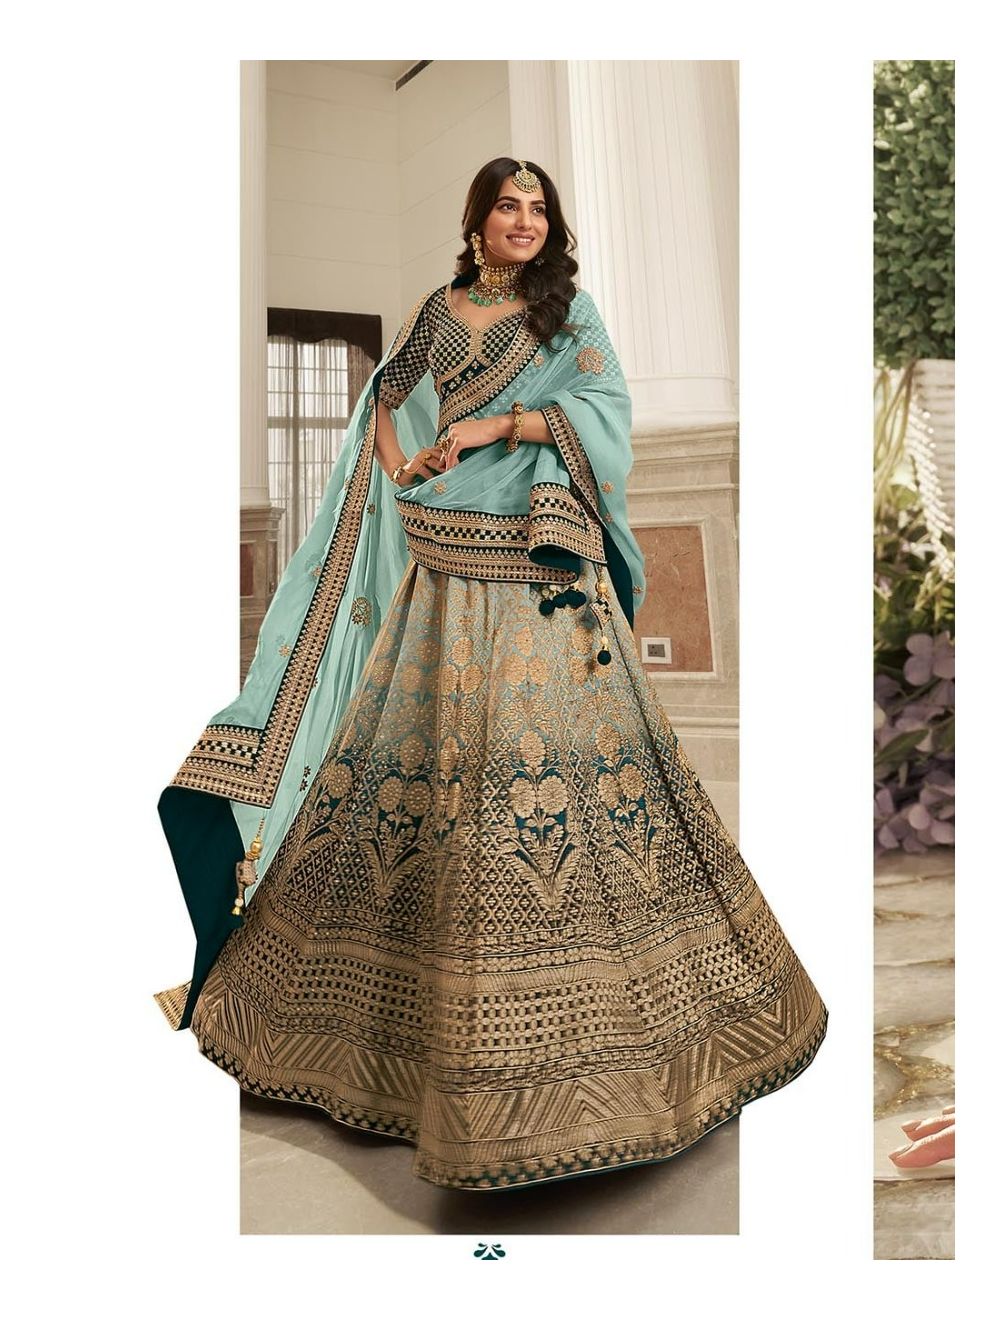 Heer Boutique, Ananad - Lehenga - Anand city - Weddingwire.in